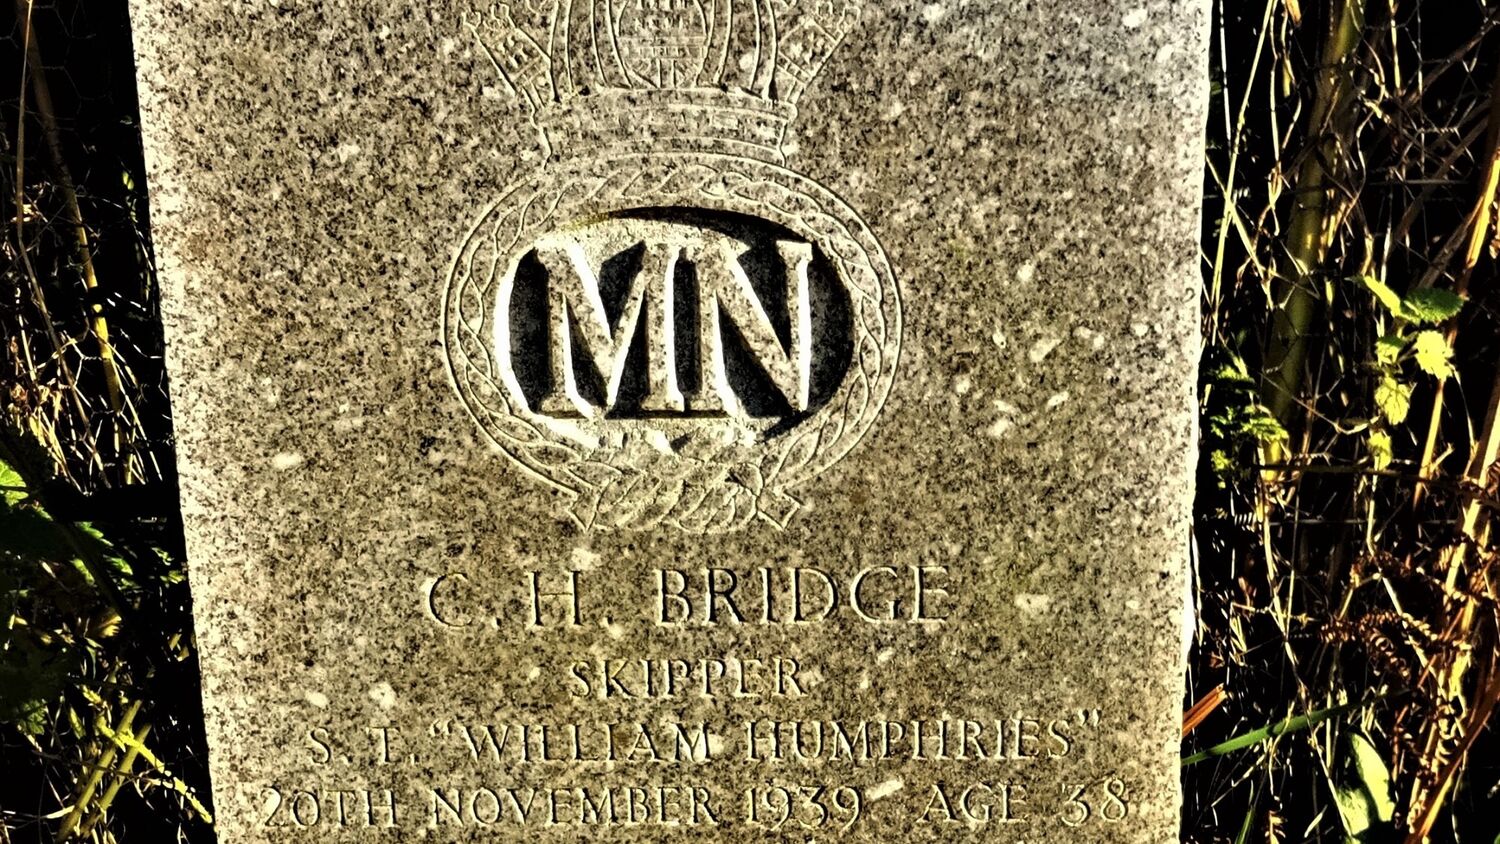 A close-up of a gravestone. At the top is a coat of arms with the letters MN carved inside. Beneath the engraving reads: C H Bridge, Skipper, S. T. ‘William Humphries’, 20th November 1939, Age 38.